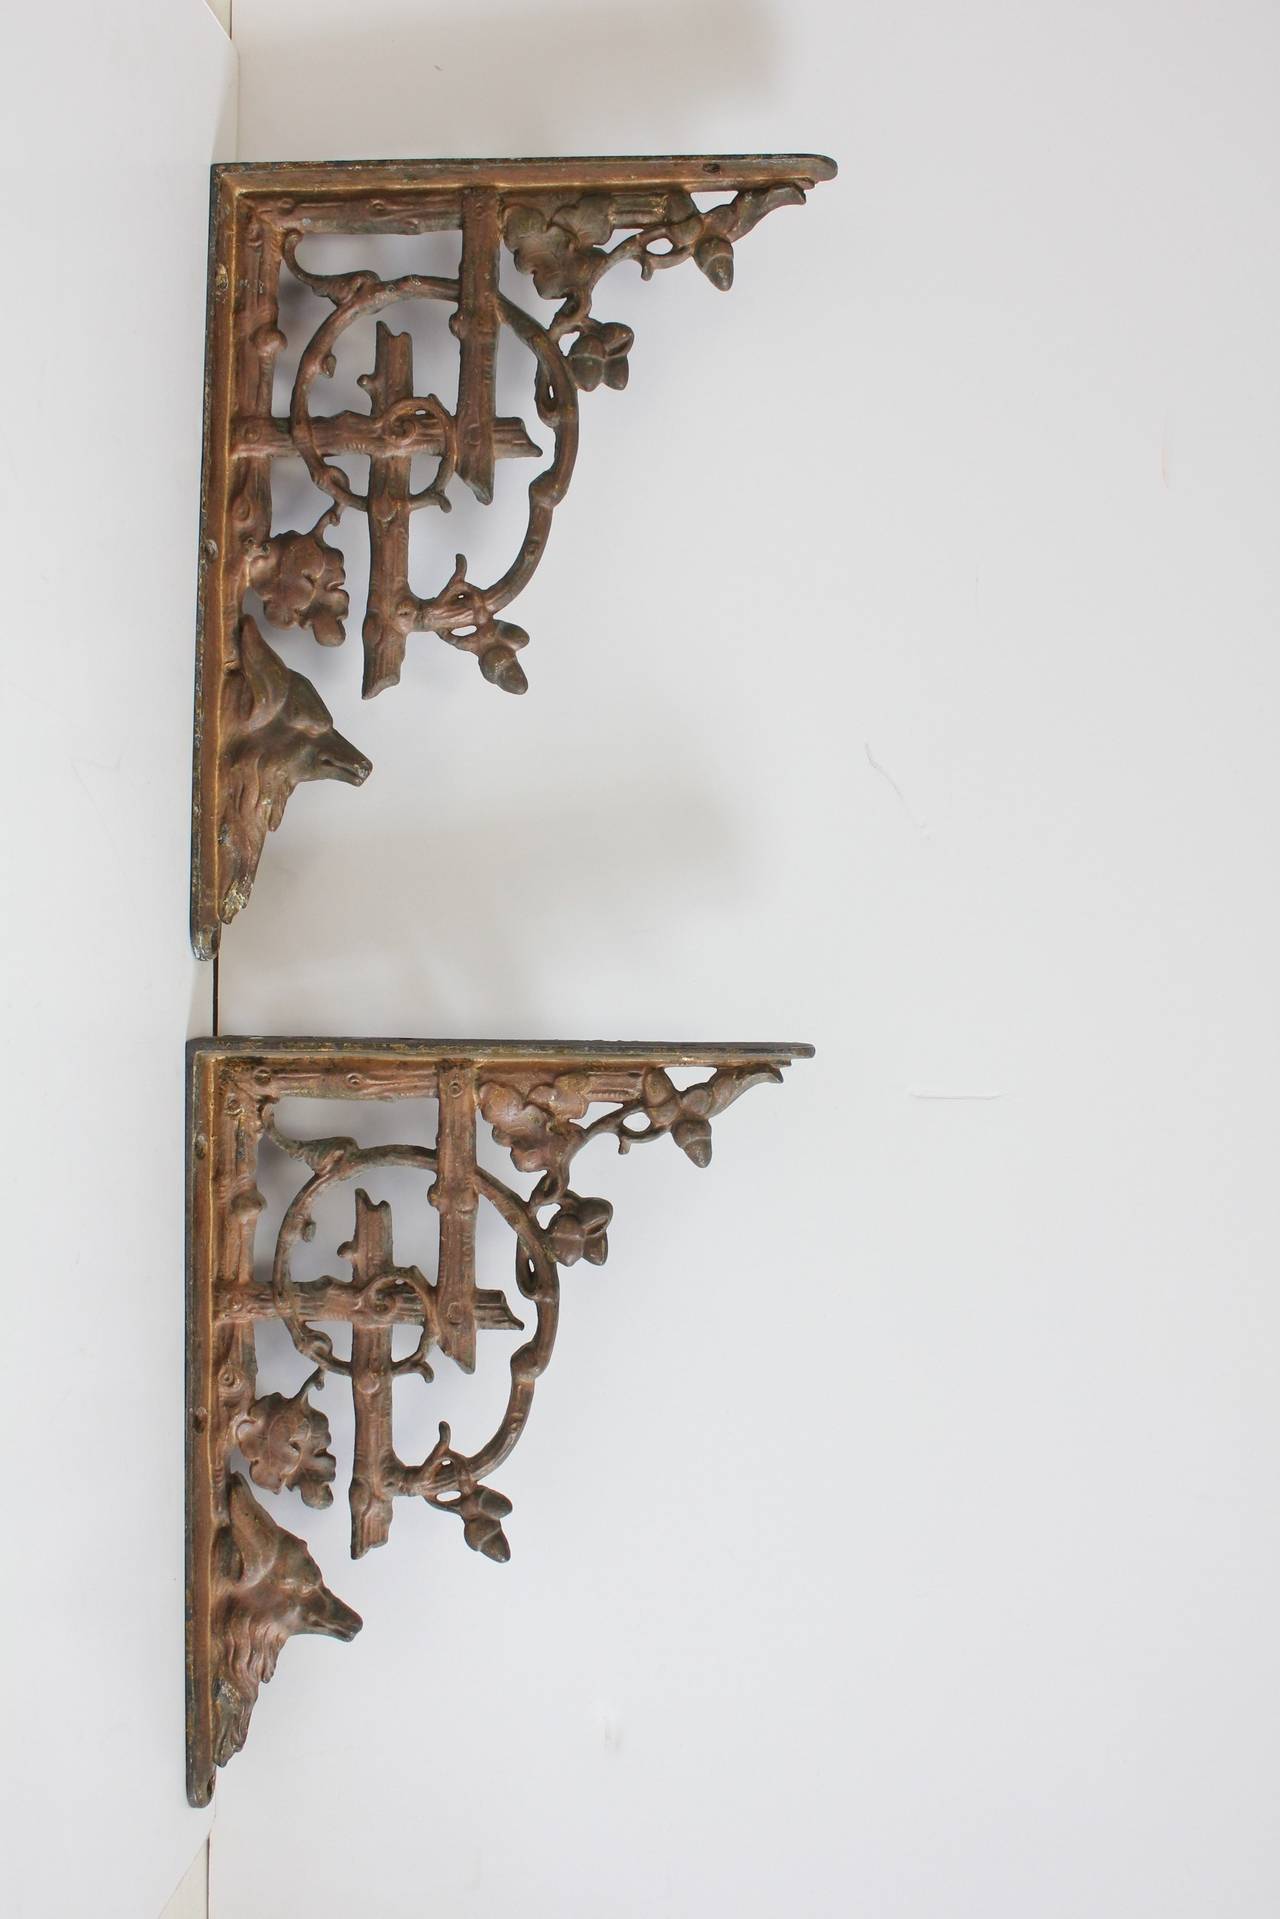 Antique cast iron wall brackets with wolf and acorns design.